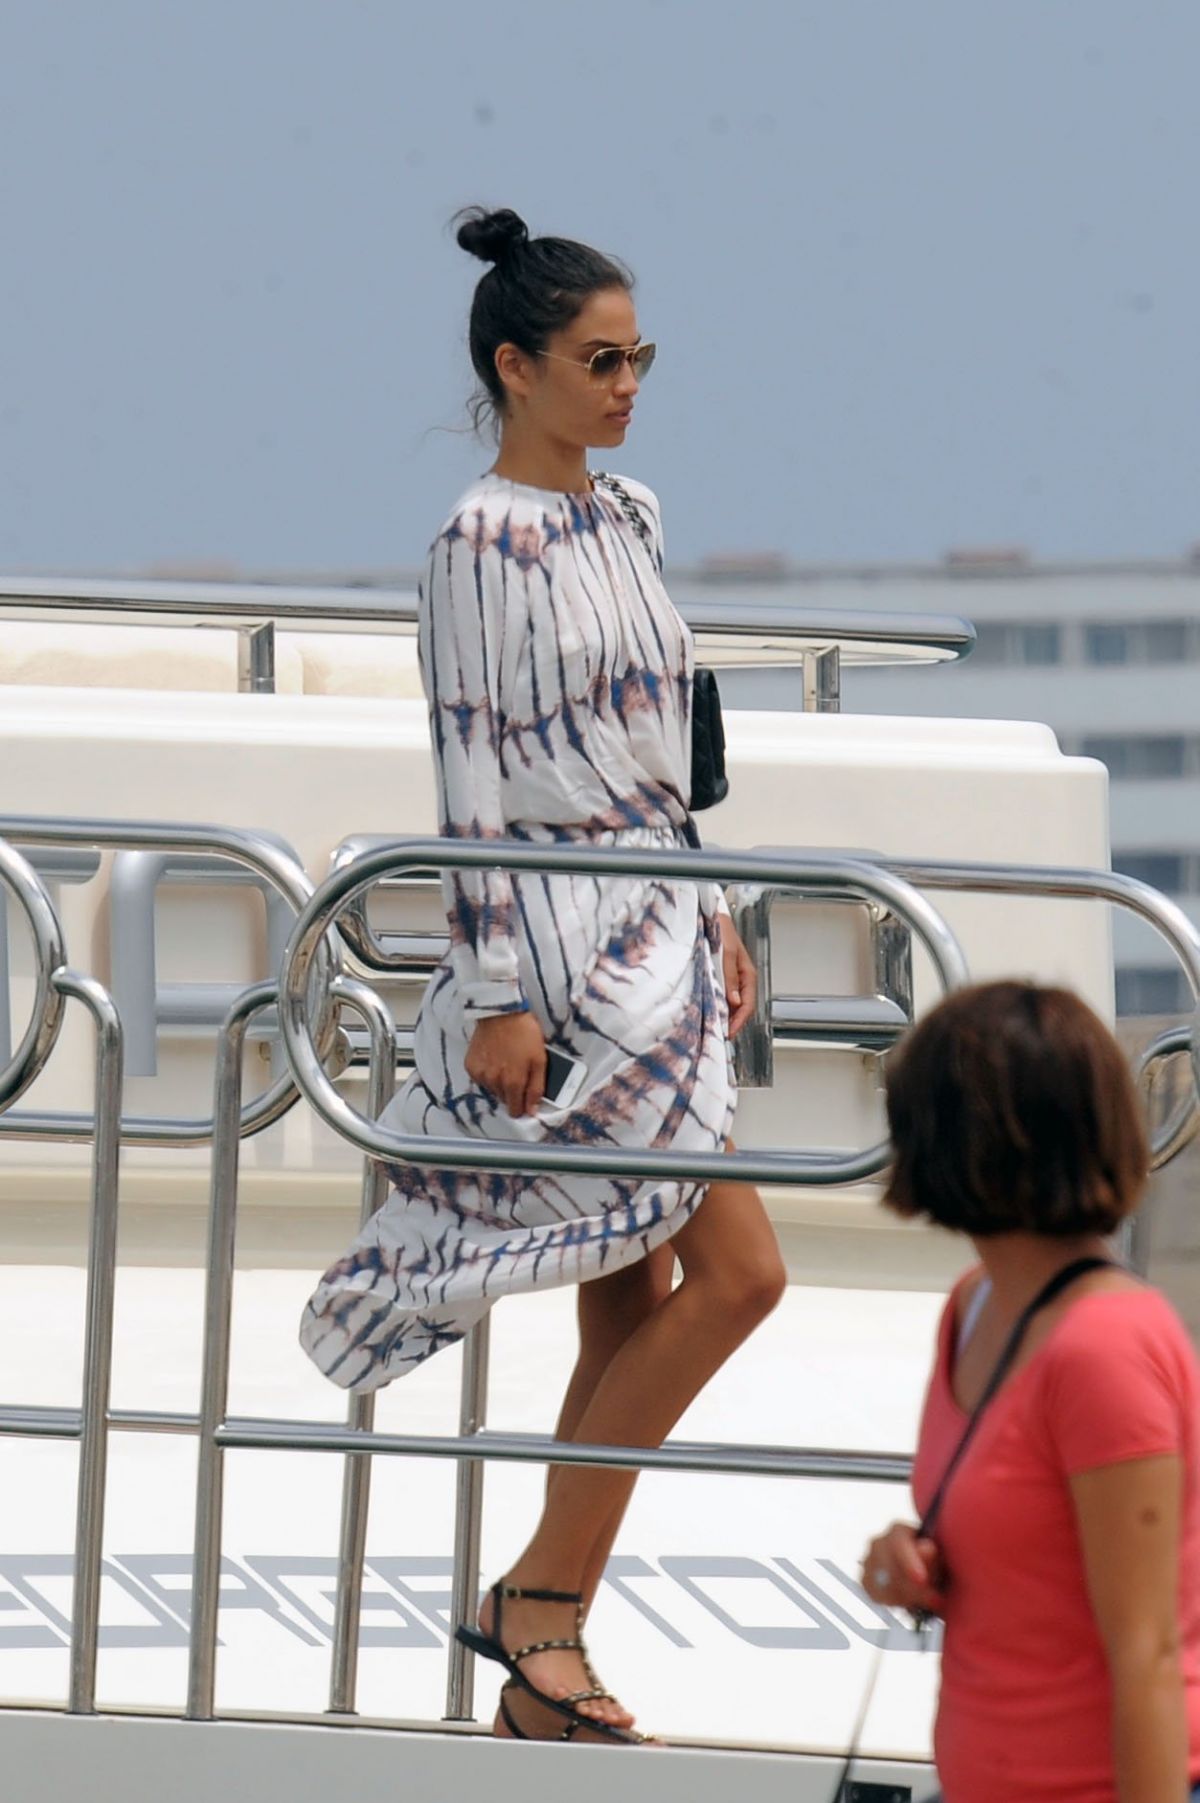 SHANINA SHAIK Out and About in Ibiza – HawtCelebs